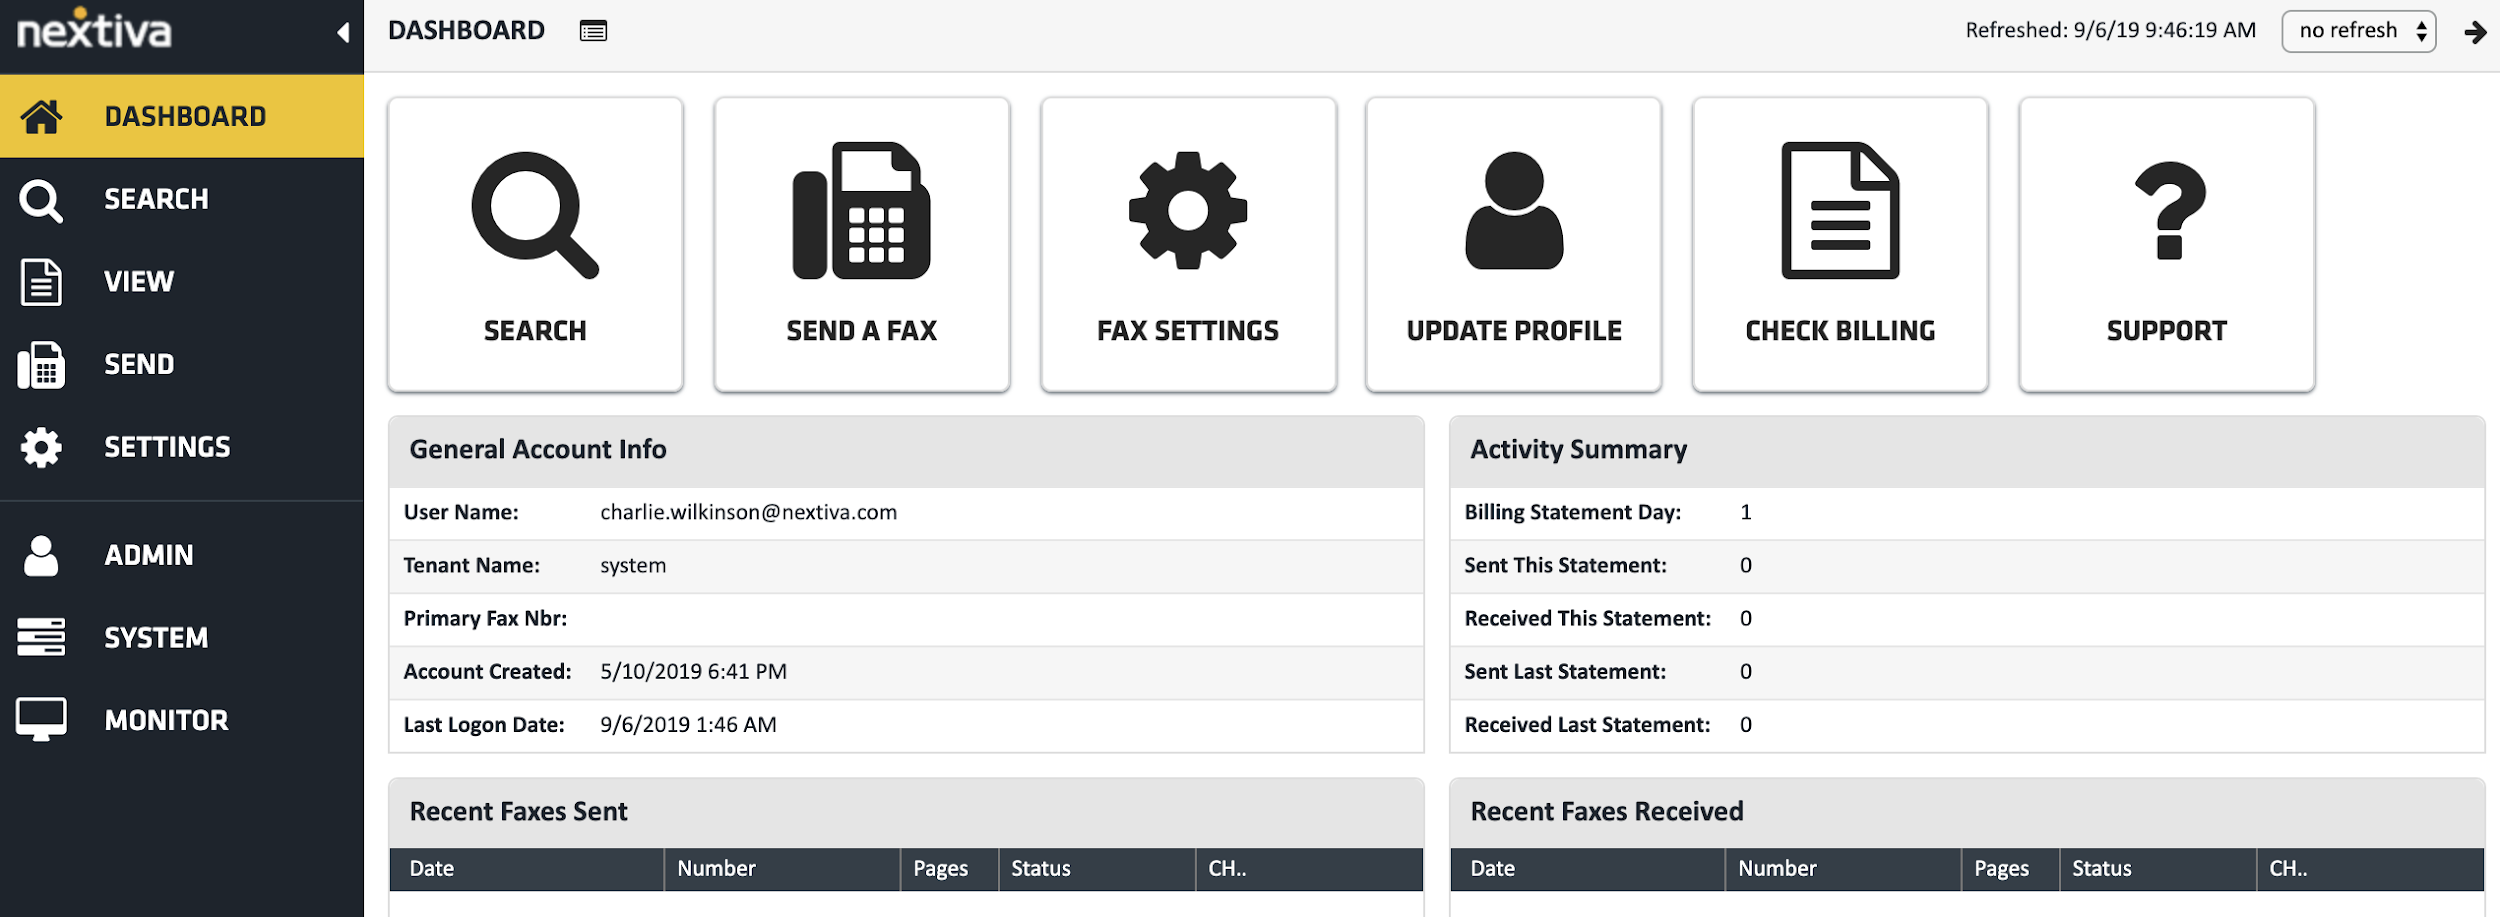 Screenshot of an online fax software to send and receive faxes - Nextiva